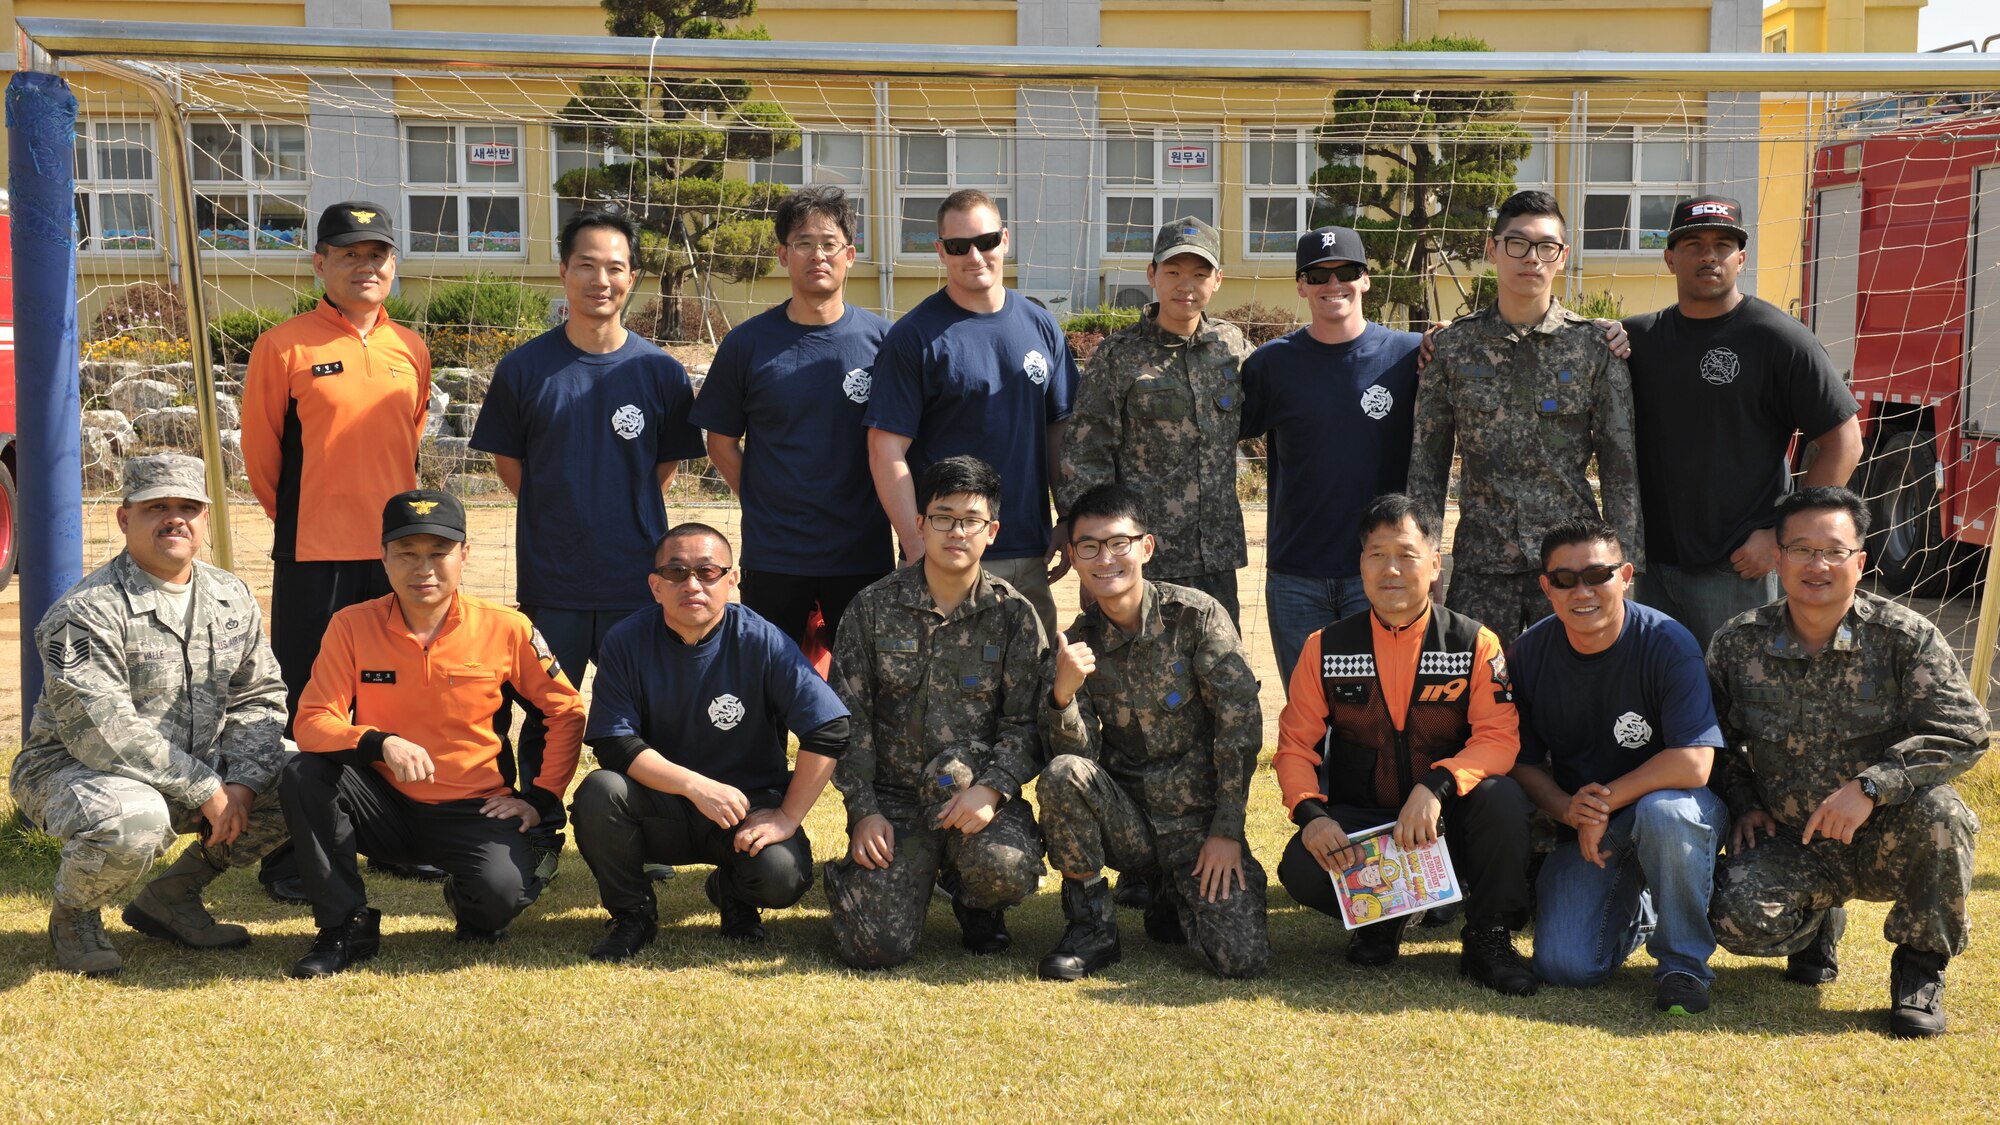 Fire department members from the 8th Civil Engineer Squadron, Republic of Korea air force 38th Fighter Group, and local Gunsan City Fire Department pose for a photo following a fire prevention demonstration at Okbong Elementary School, Oct. 7, 2014. As part of fire prevention week, Kunsan’s fire department conducted more than 10 fire drills and provided fire safety training Oct. 5-11. (U.S. Air Force photo by Senior Airman Katrina Heikkinen/released)